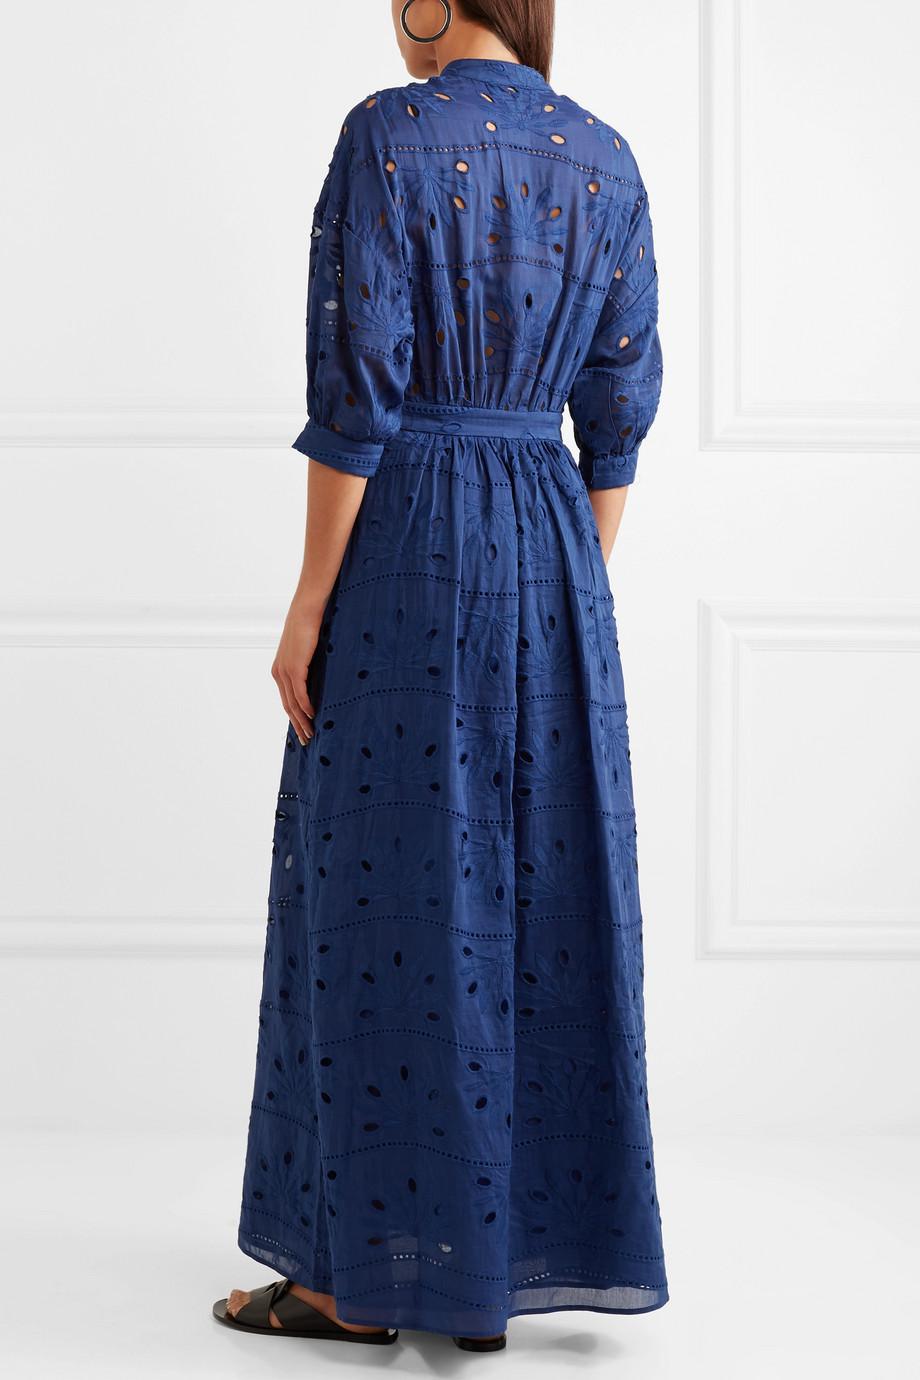 Paul & Joe Broderie Anglaise Cotton And Silk-blend Maxi Dress in Blue | Lyst